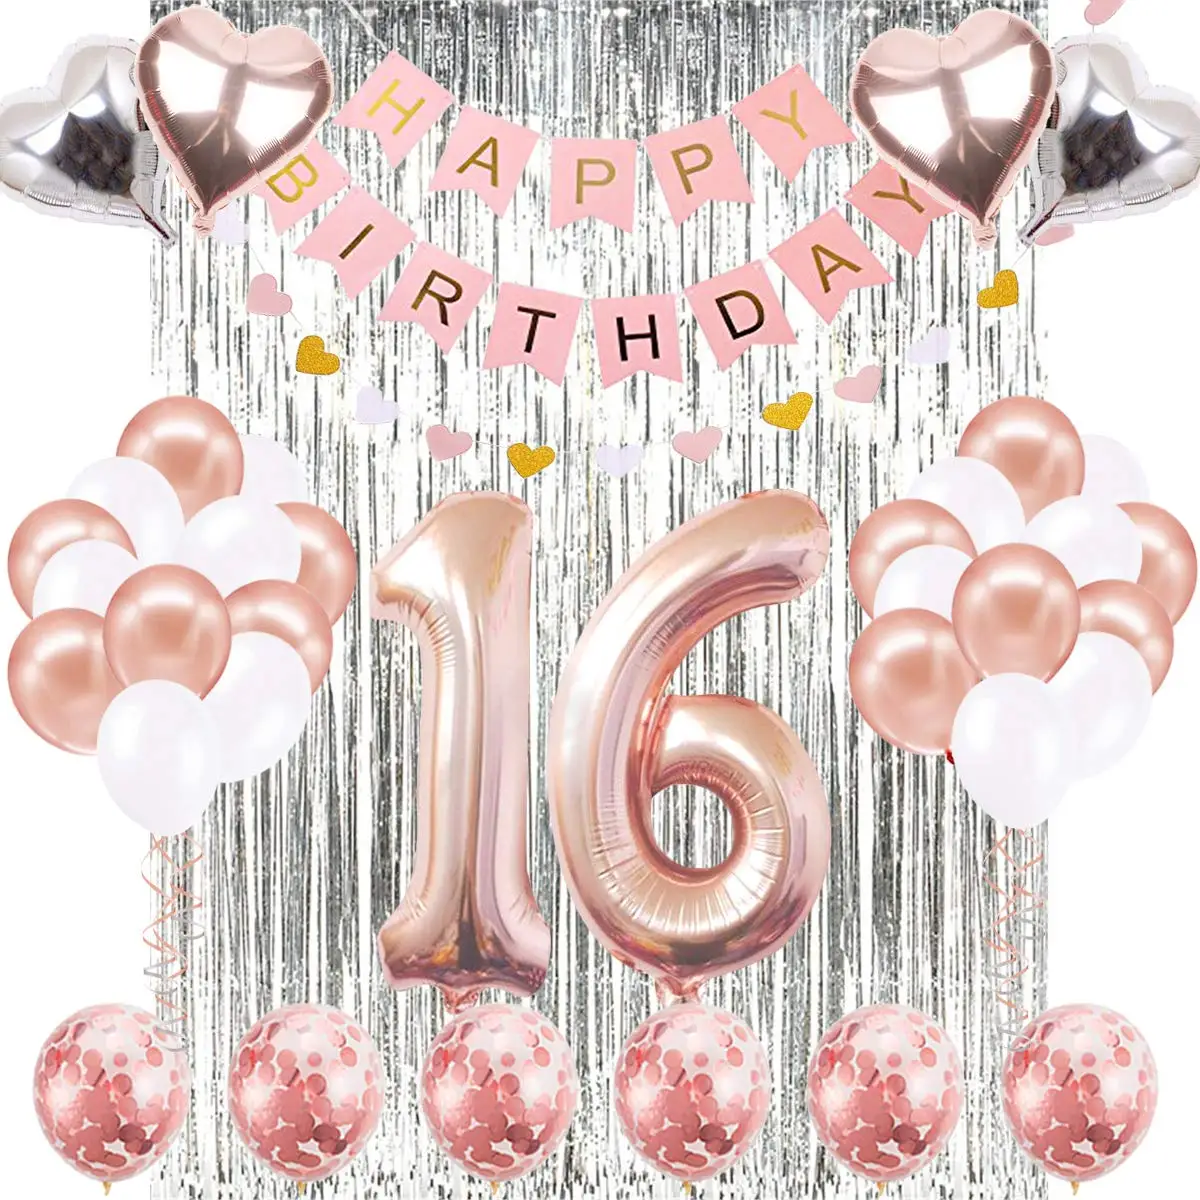 16th Anniversaire Decorations Banniere Joyeux Anniversaire Banniere 16 Ans Anniversaire Decoration Fournitures Sweet Sixteen Decoration Buy 16th Decorations D Anniversaire Fournitures De Fete En Or Rose Decoration Sweet Seize Product On Alibaba Com